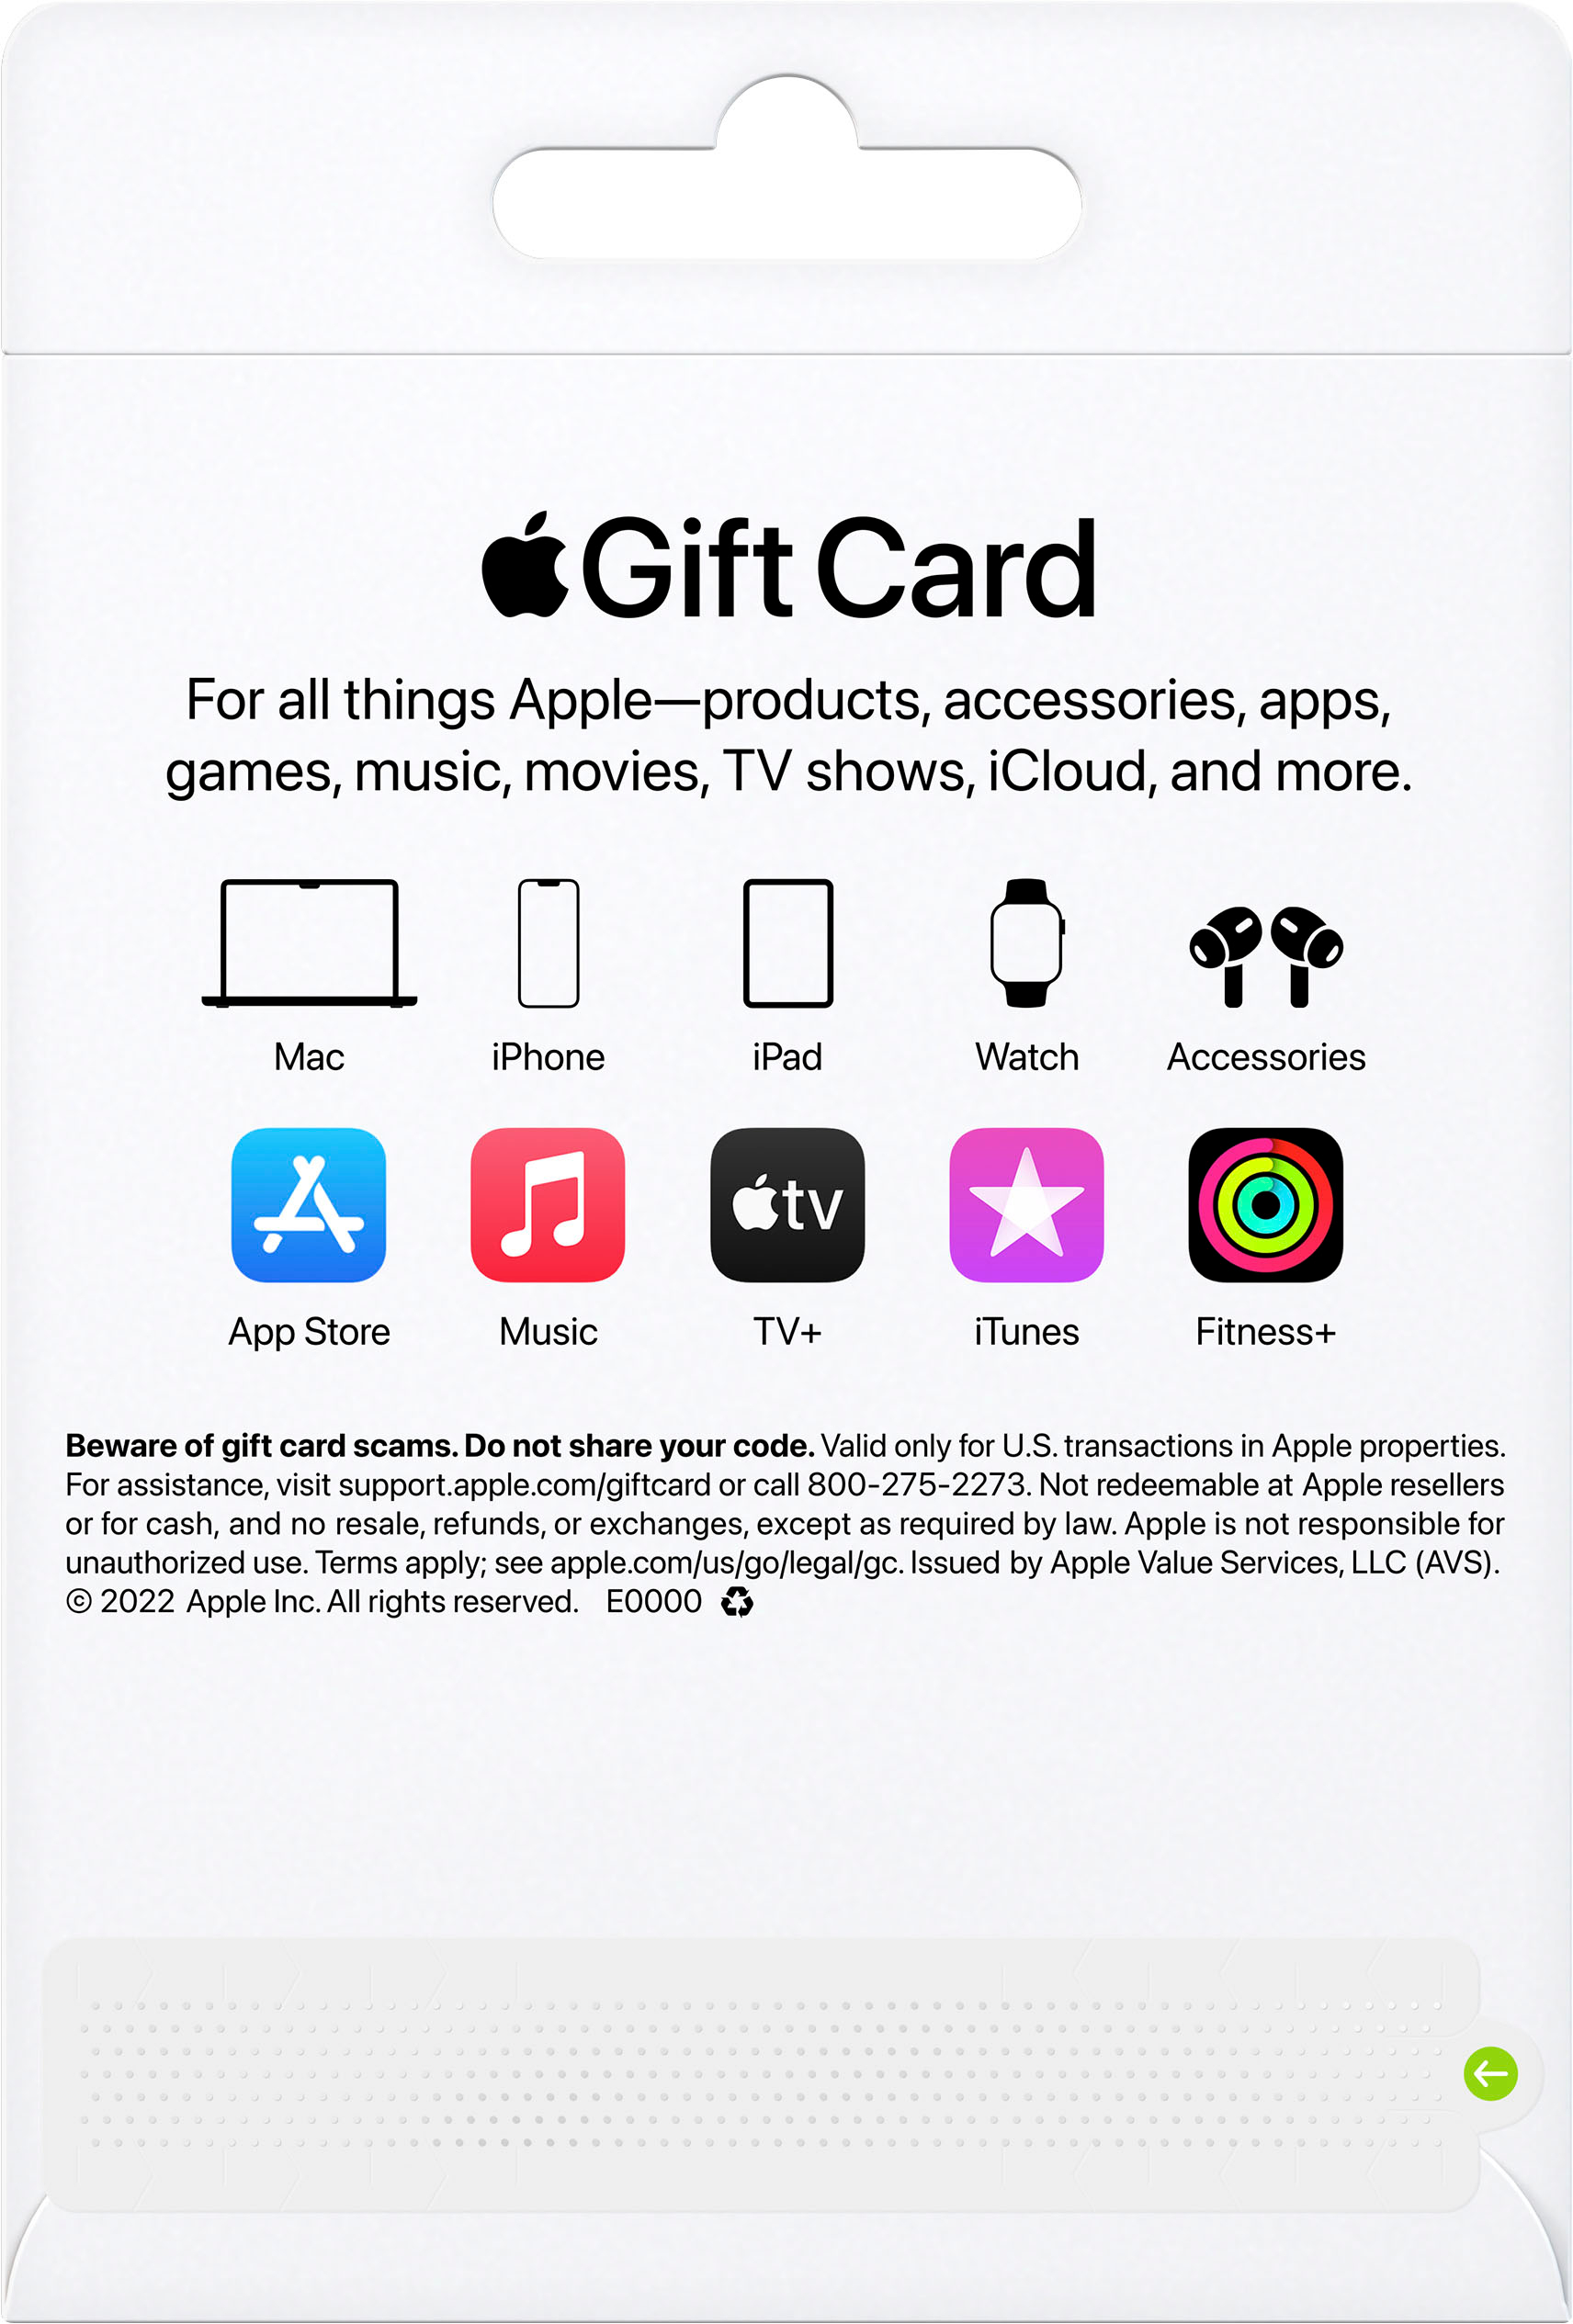 Pence Leven van Kraan Apple Gift Card App Store, Music, iTunes, iPhone, iPad, AirPods,  accessories, and more APPLE GIFT CARD $100 - Best Buy